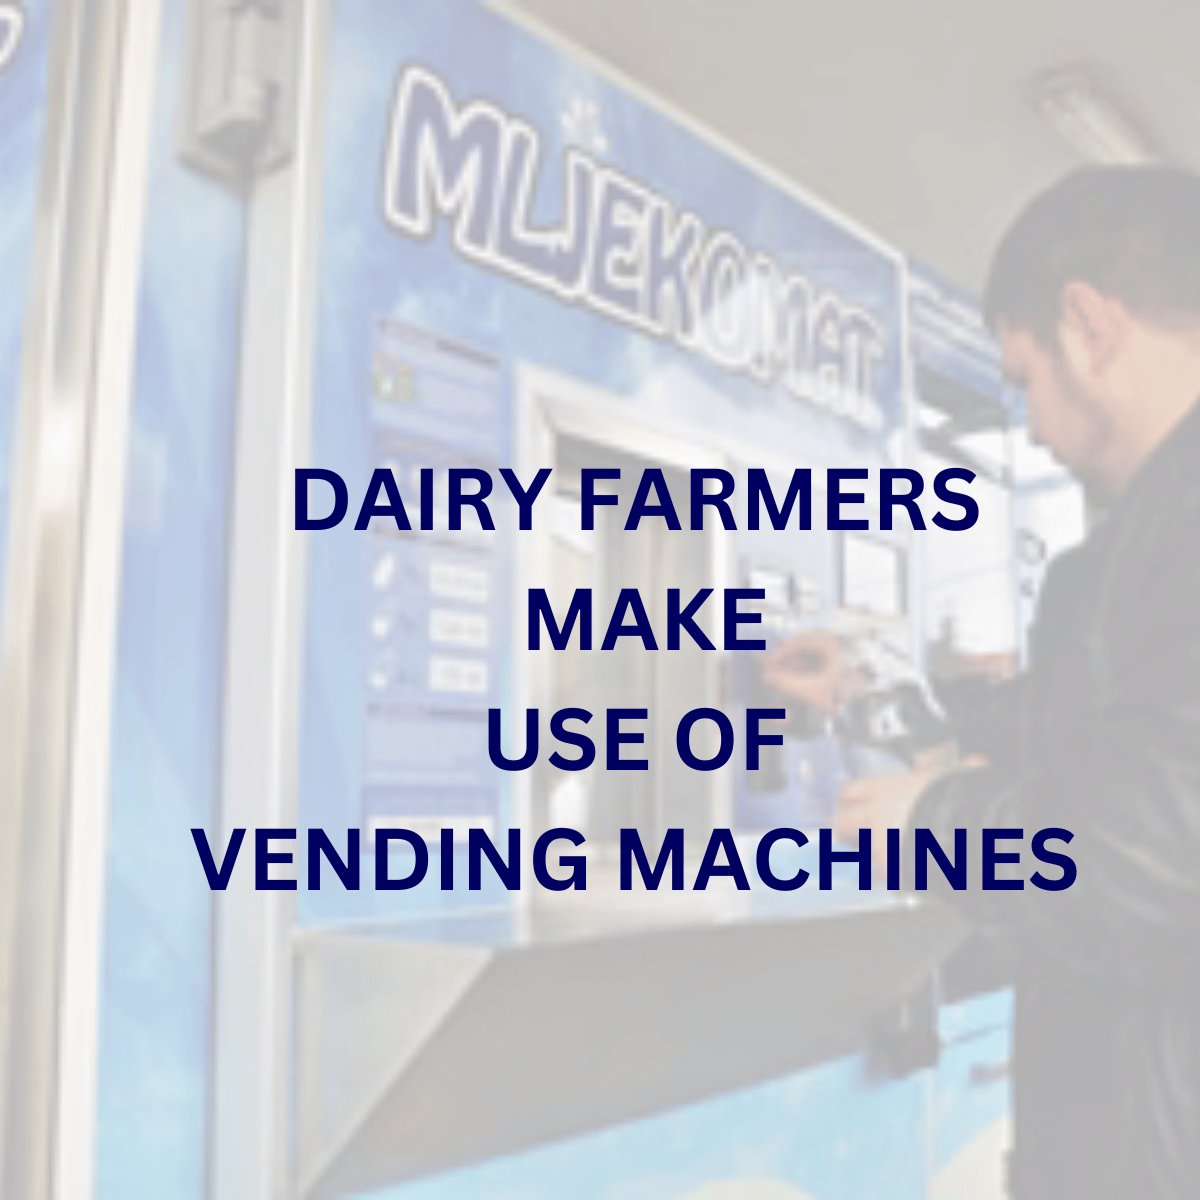 DAIRY FARMERS MAKE USE OF VENDING MACHINES